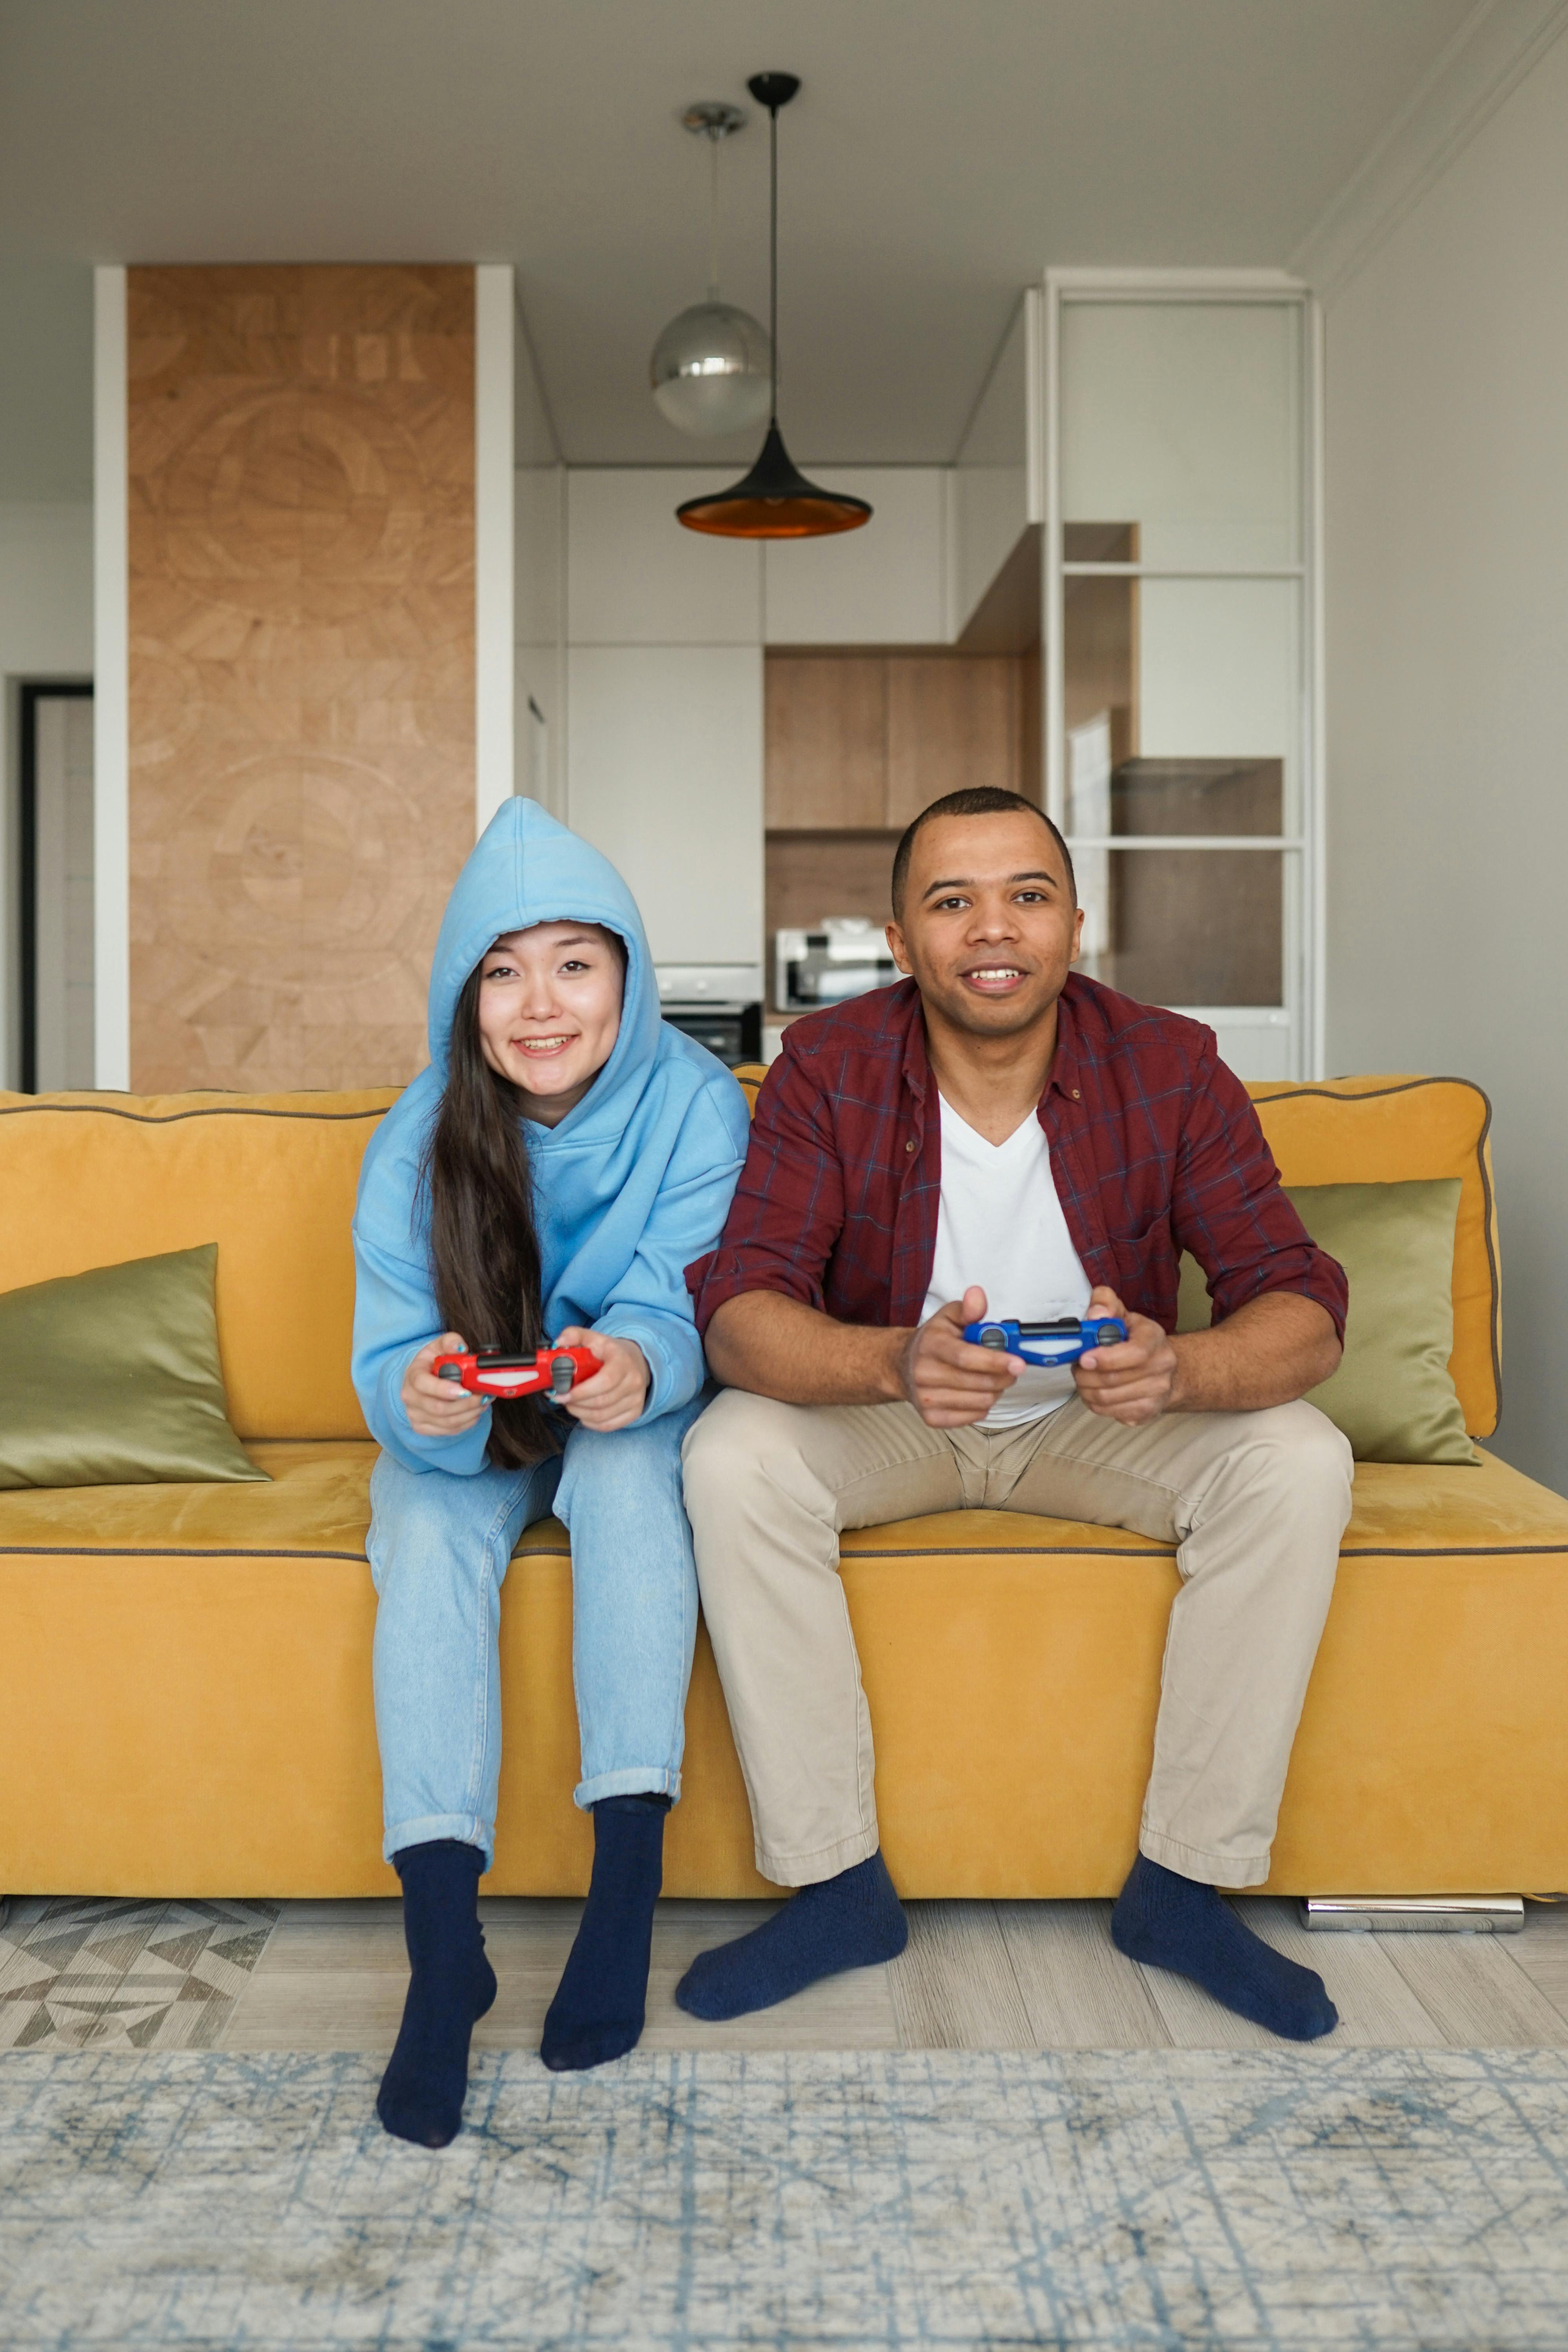 a man and woman playing video game